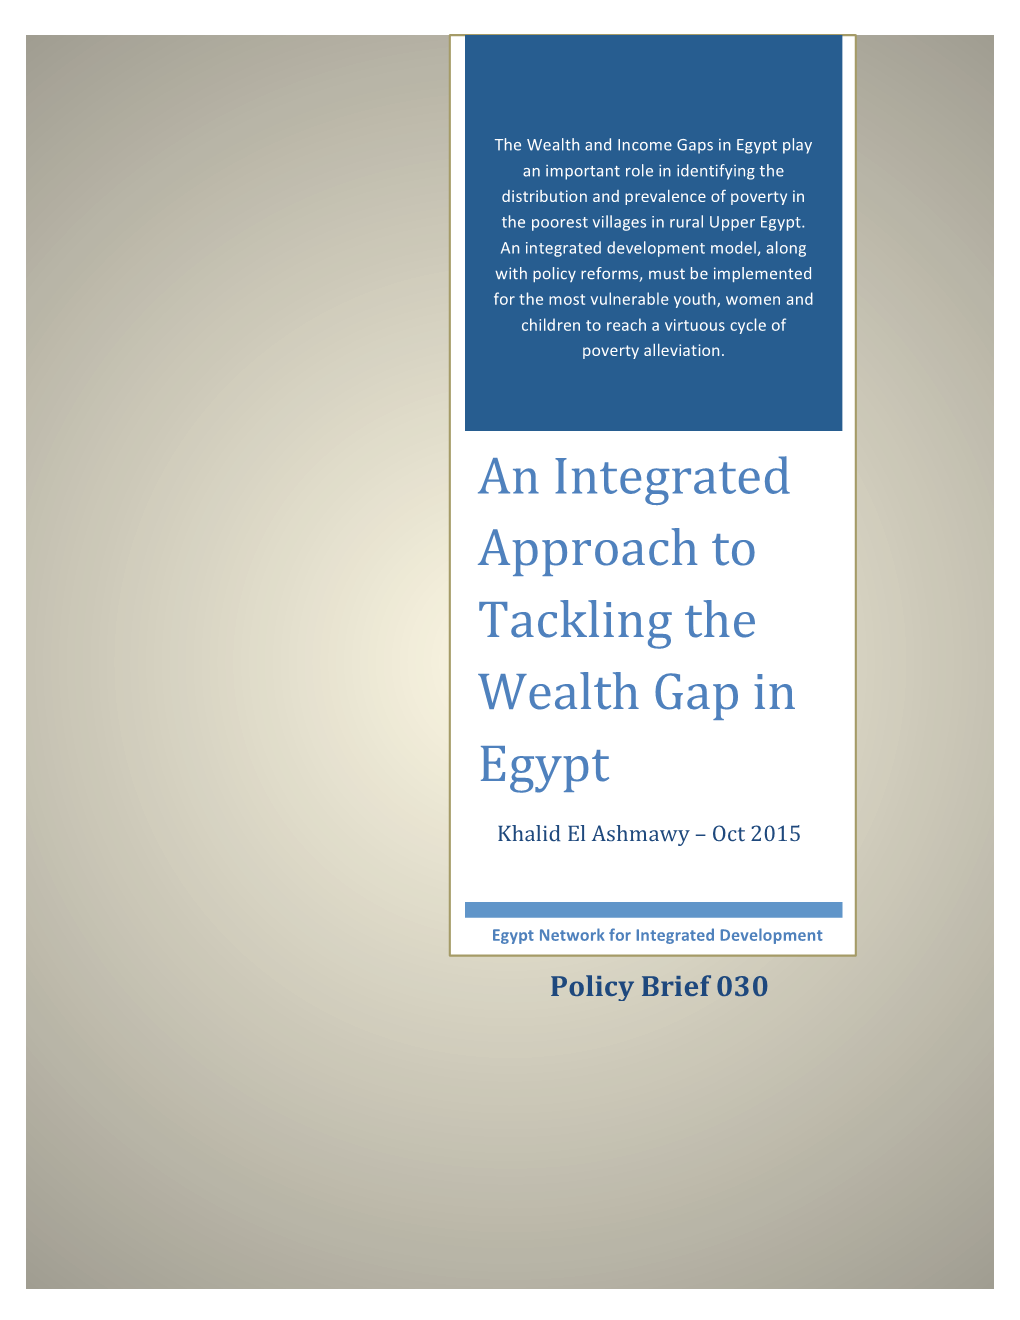 An Integrated Approach to Tackling the Wealth Gap in Egypt